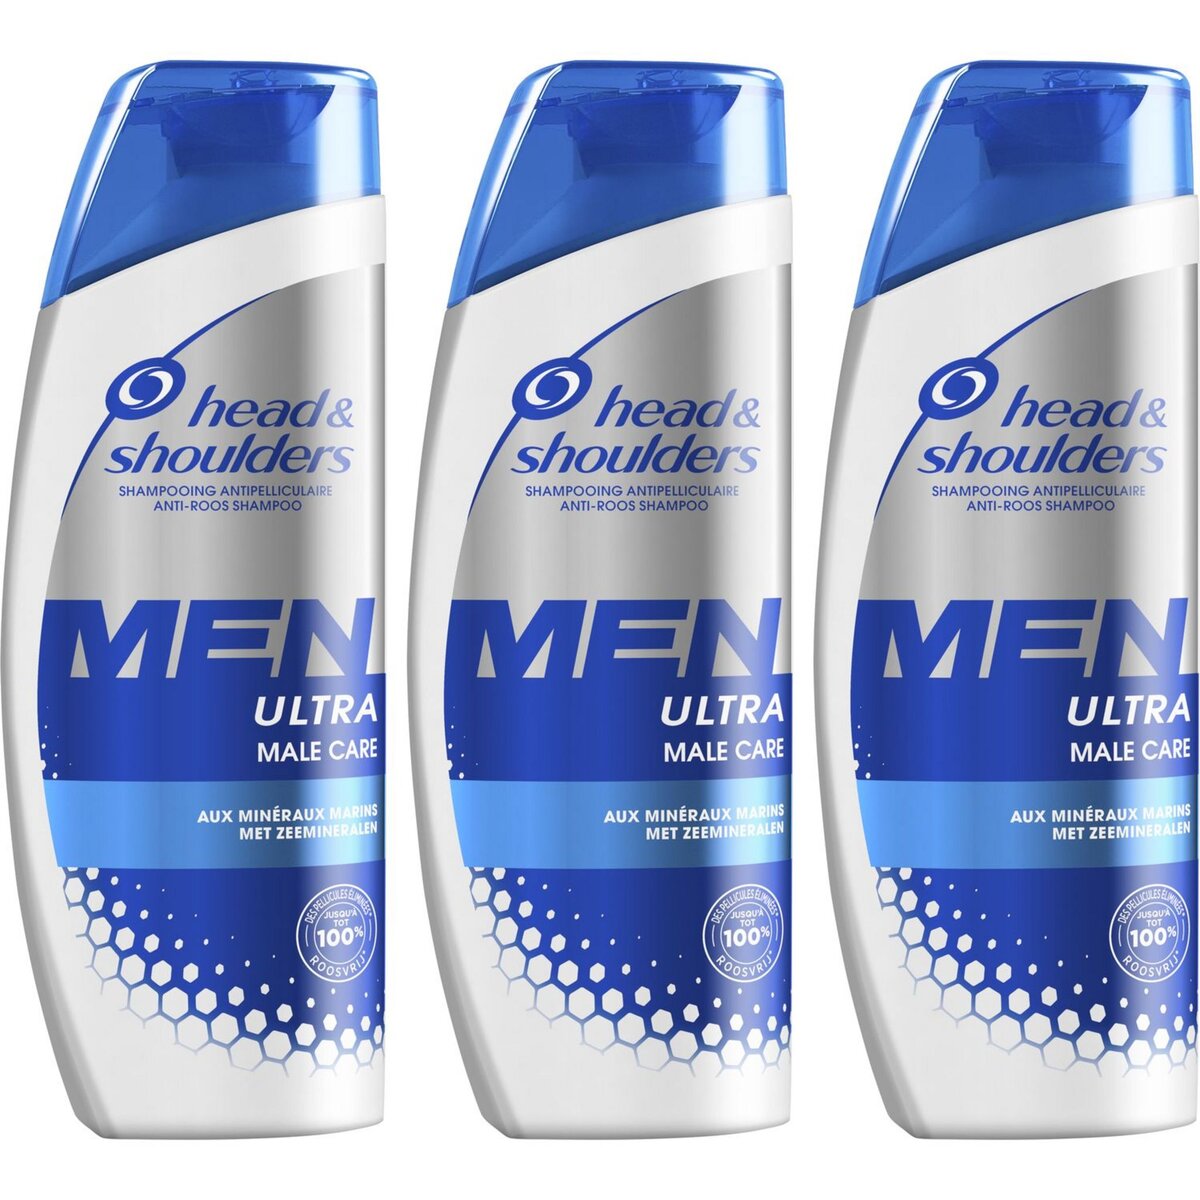 HEAD & SHOULDERS Shampooing antipelliculaire homme ultra male care 3x250ml